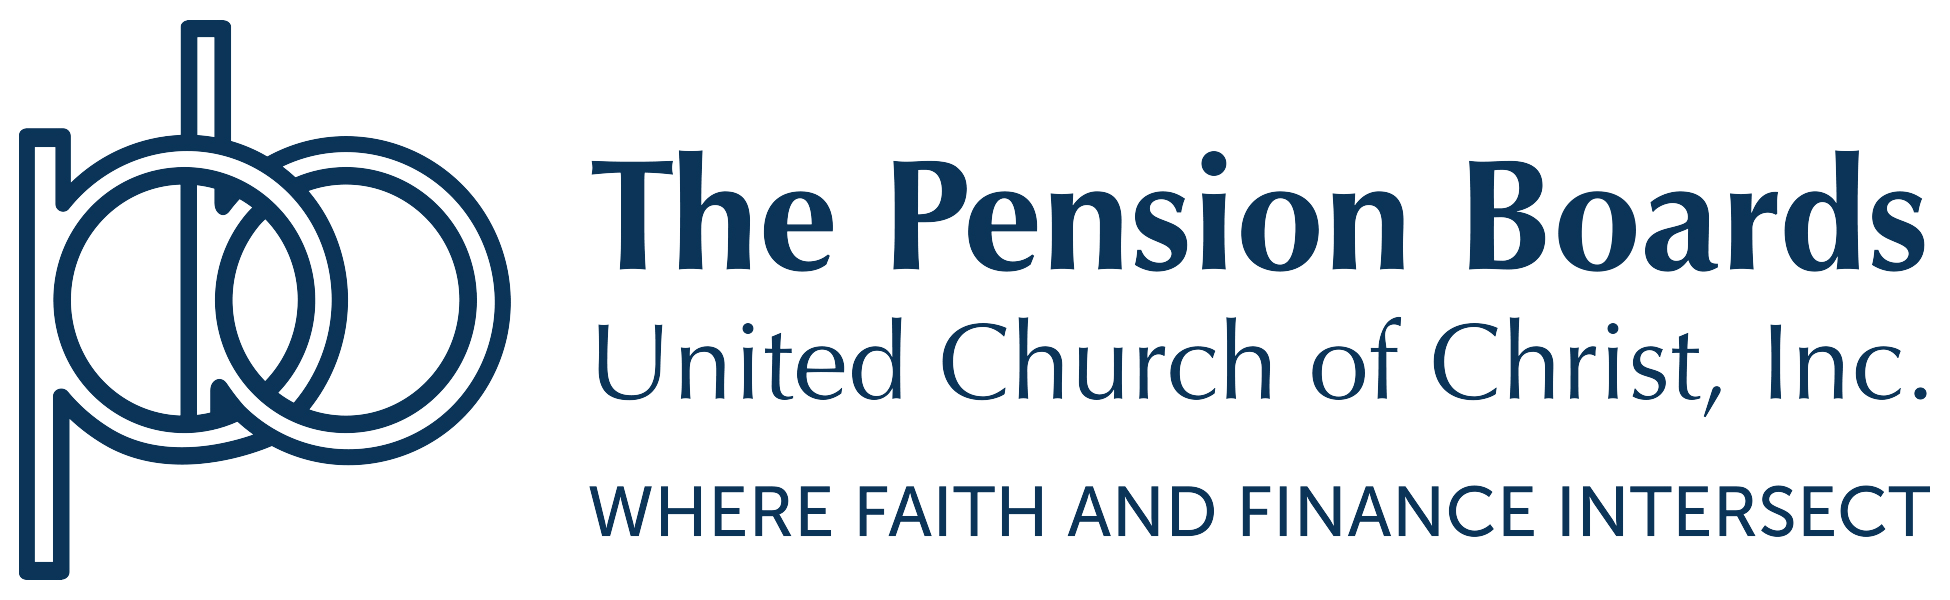 The Pension Boards United Church of Christ logo